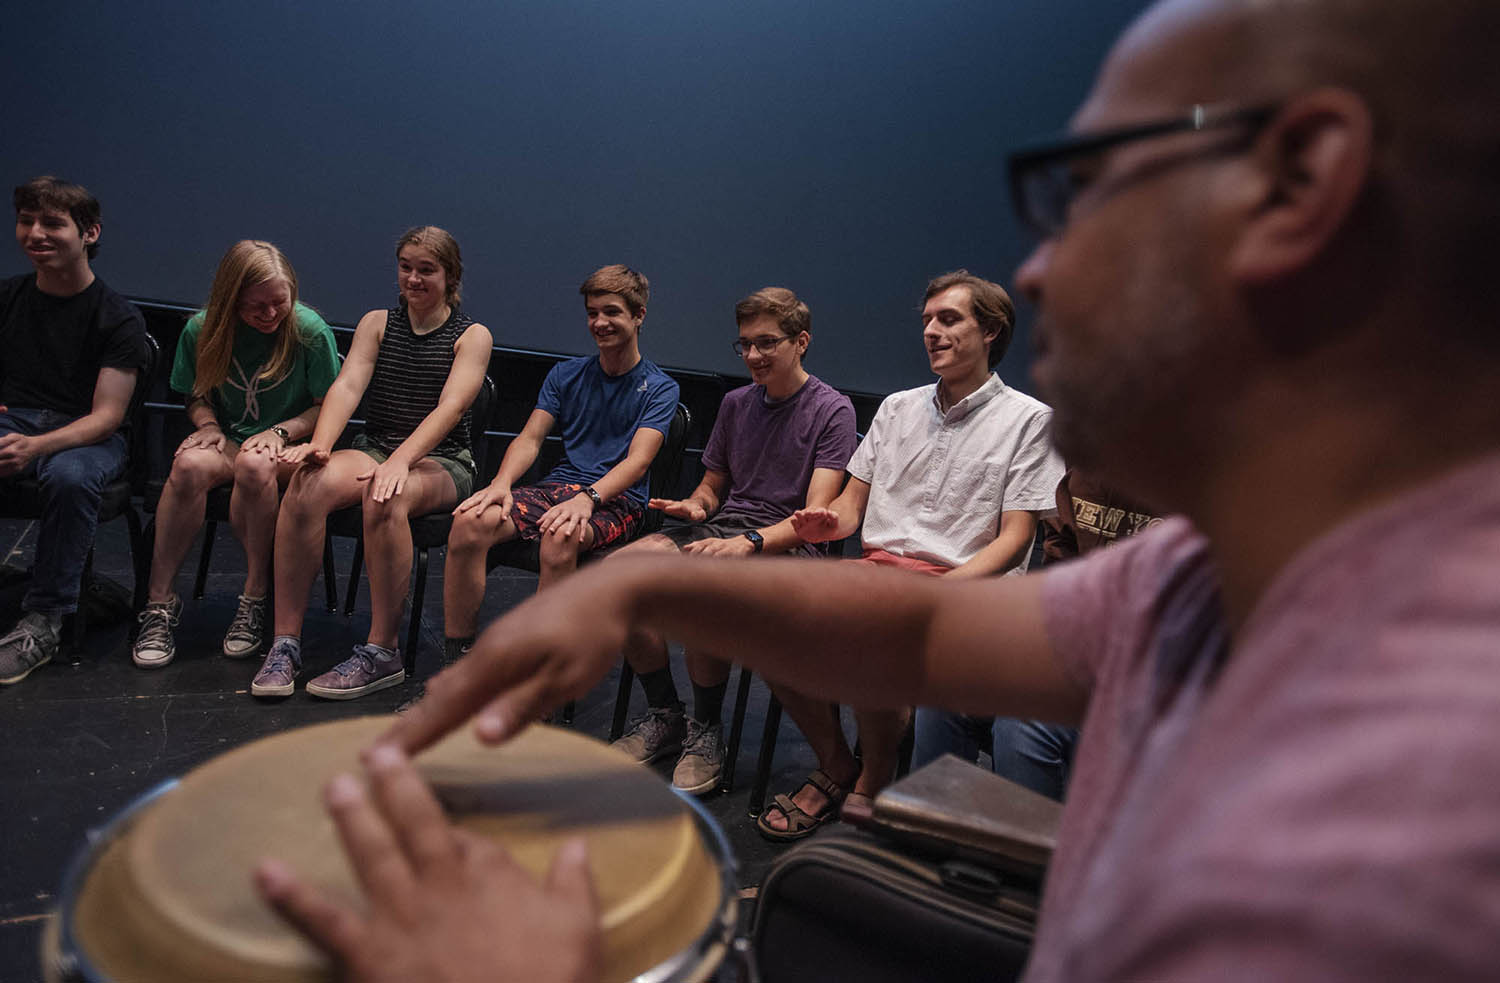 Broadway Camp musician students learn to play different instruments during a percussion workshop with Alex Torres in the GE Theatre Monday, July 29, 2019.